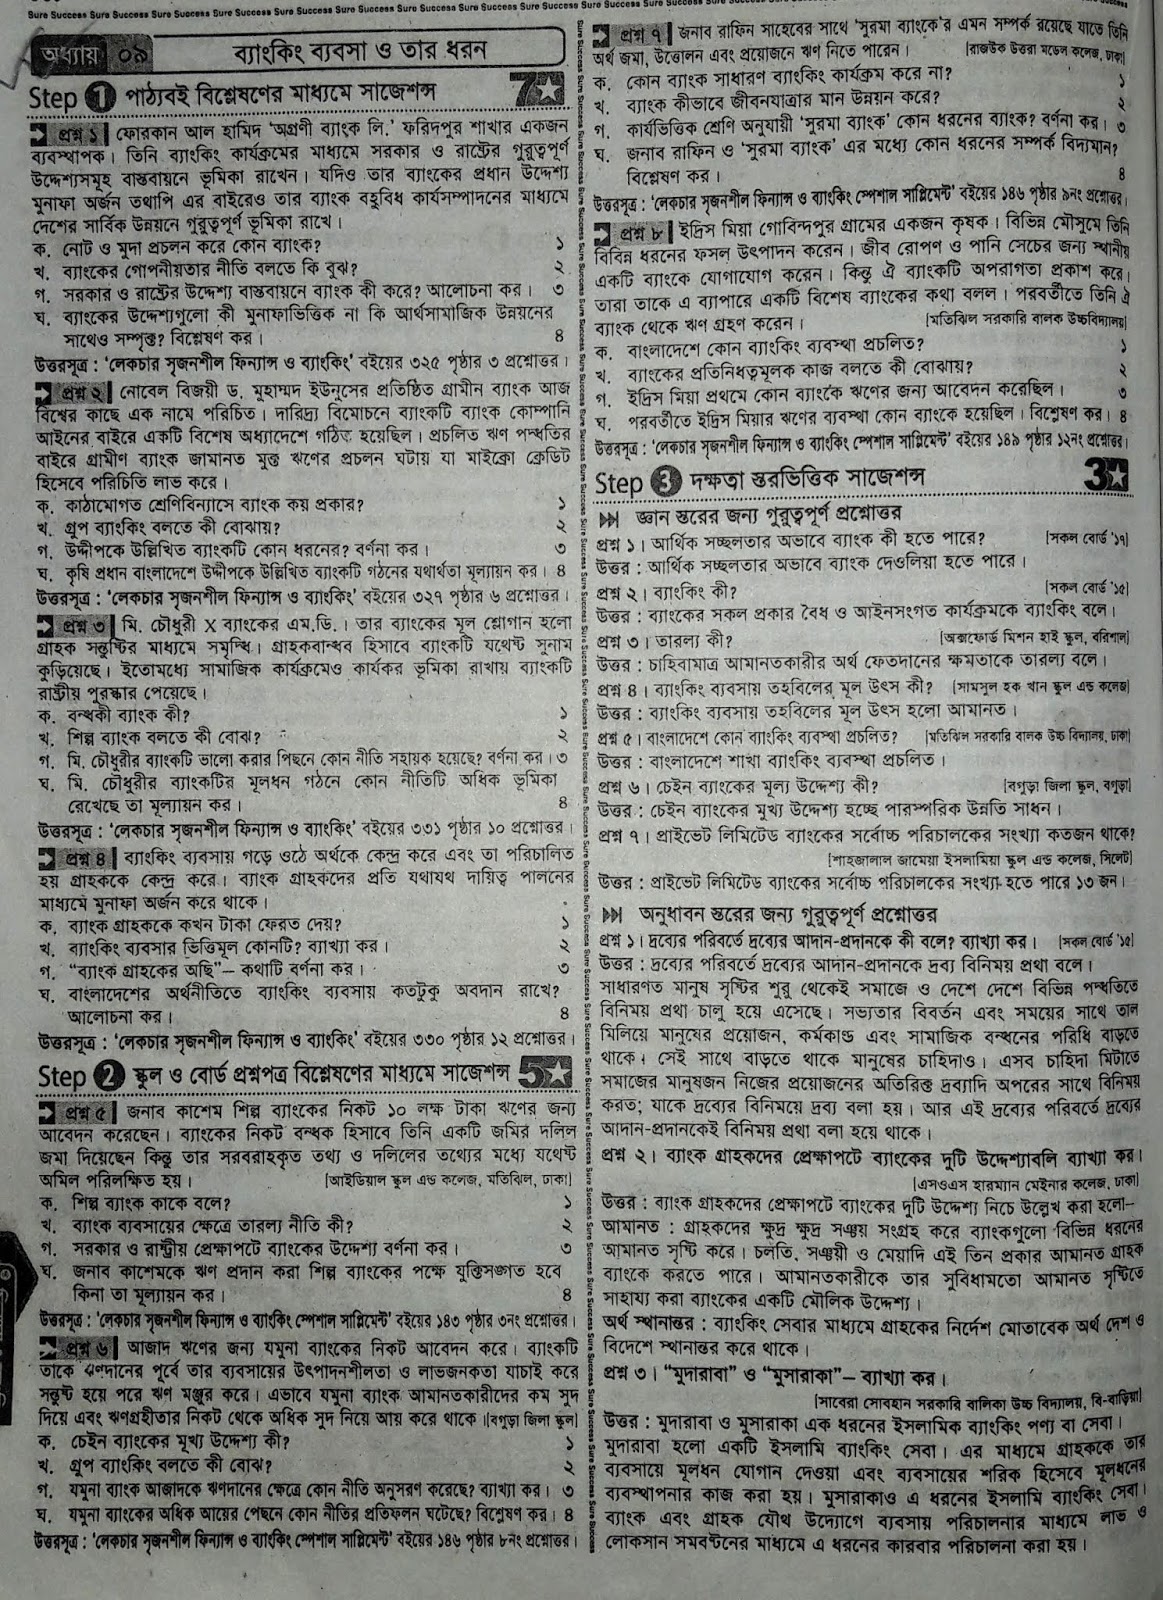 SSC Finance and Banking suggestion, question paper, model question, mcq question, question pattern, syllabus for dhaka board, all boards